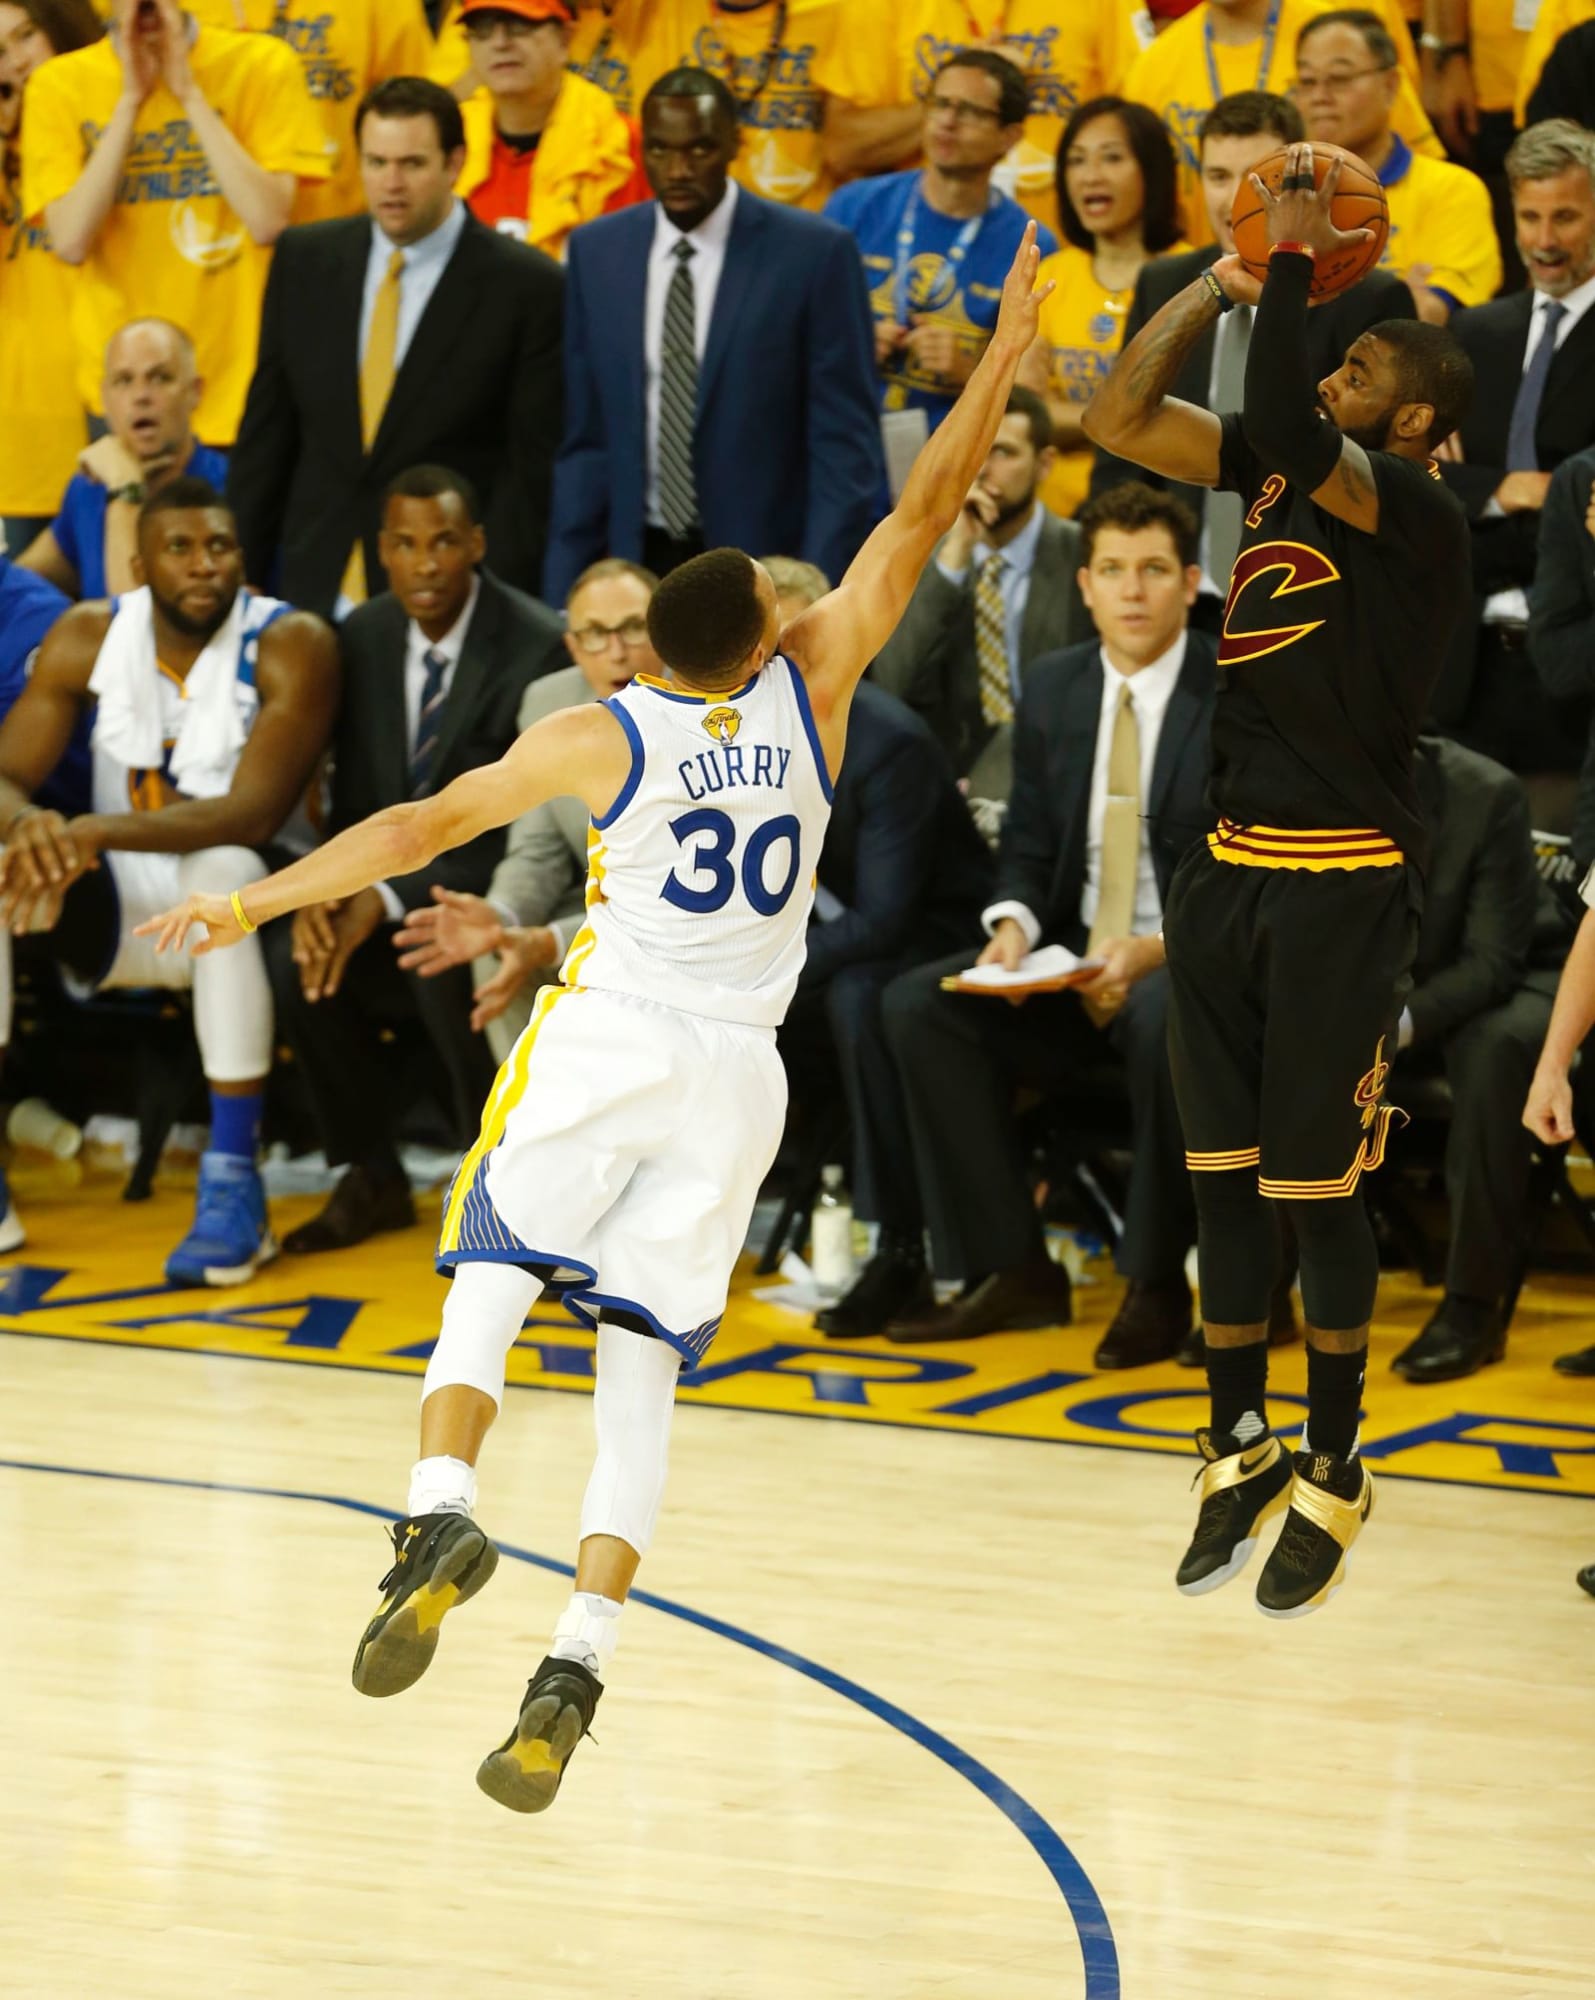 Top NBA Finals moments: Kyrie Irving's clutch 3-pointer seals 2016